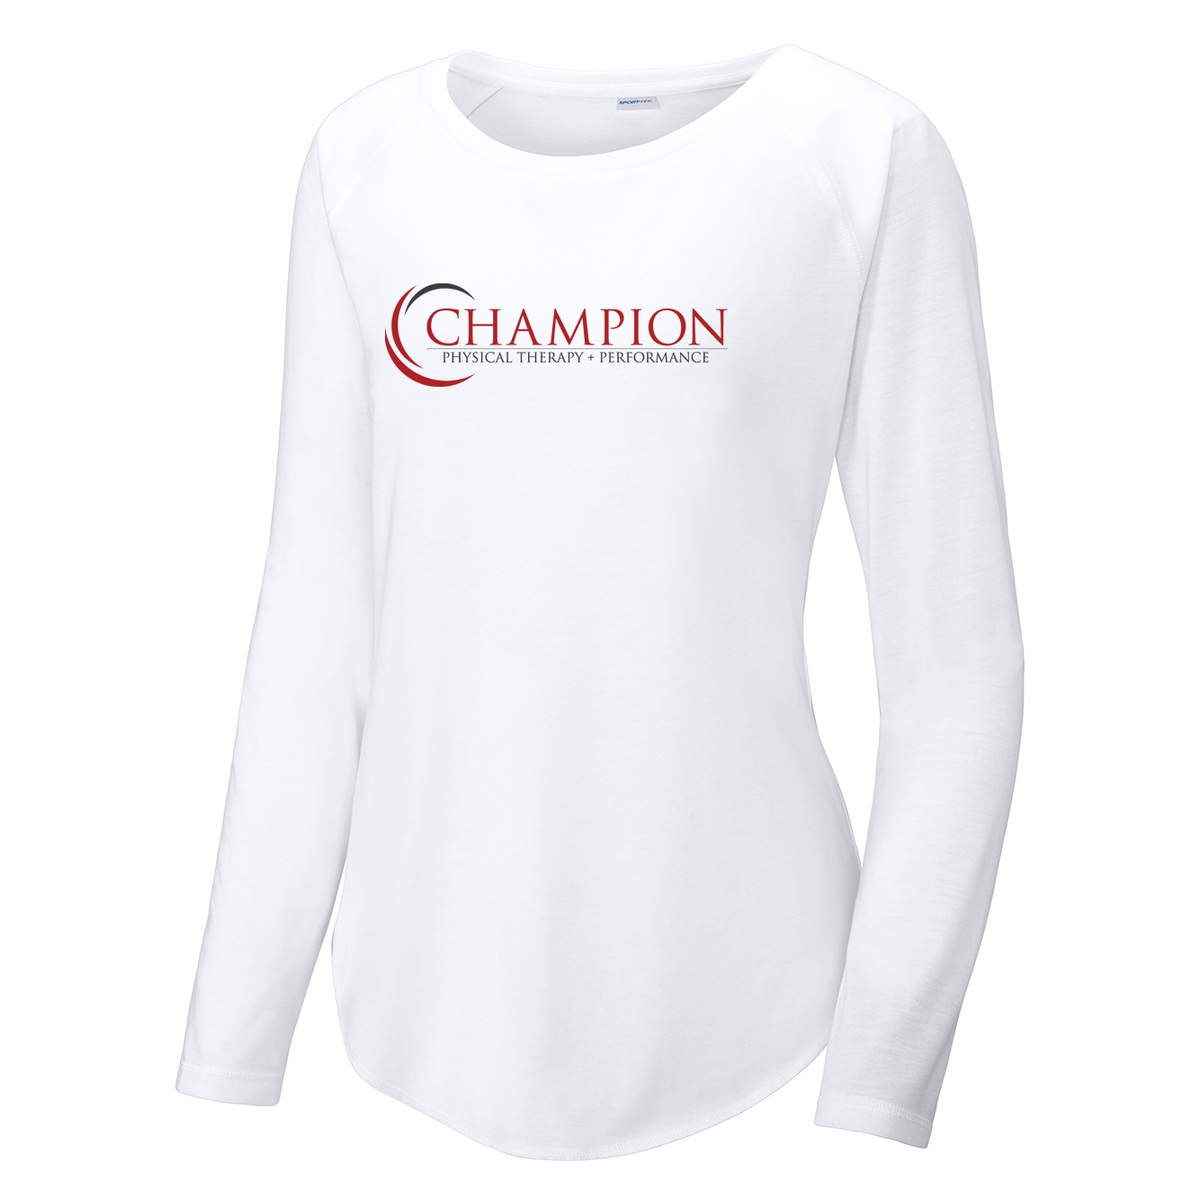 Champion Physical Therapy Women's Raglan Long Sleeve CottonTouch